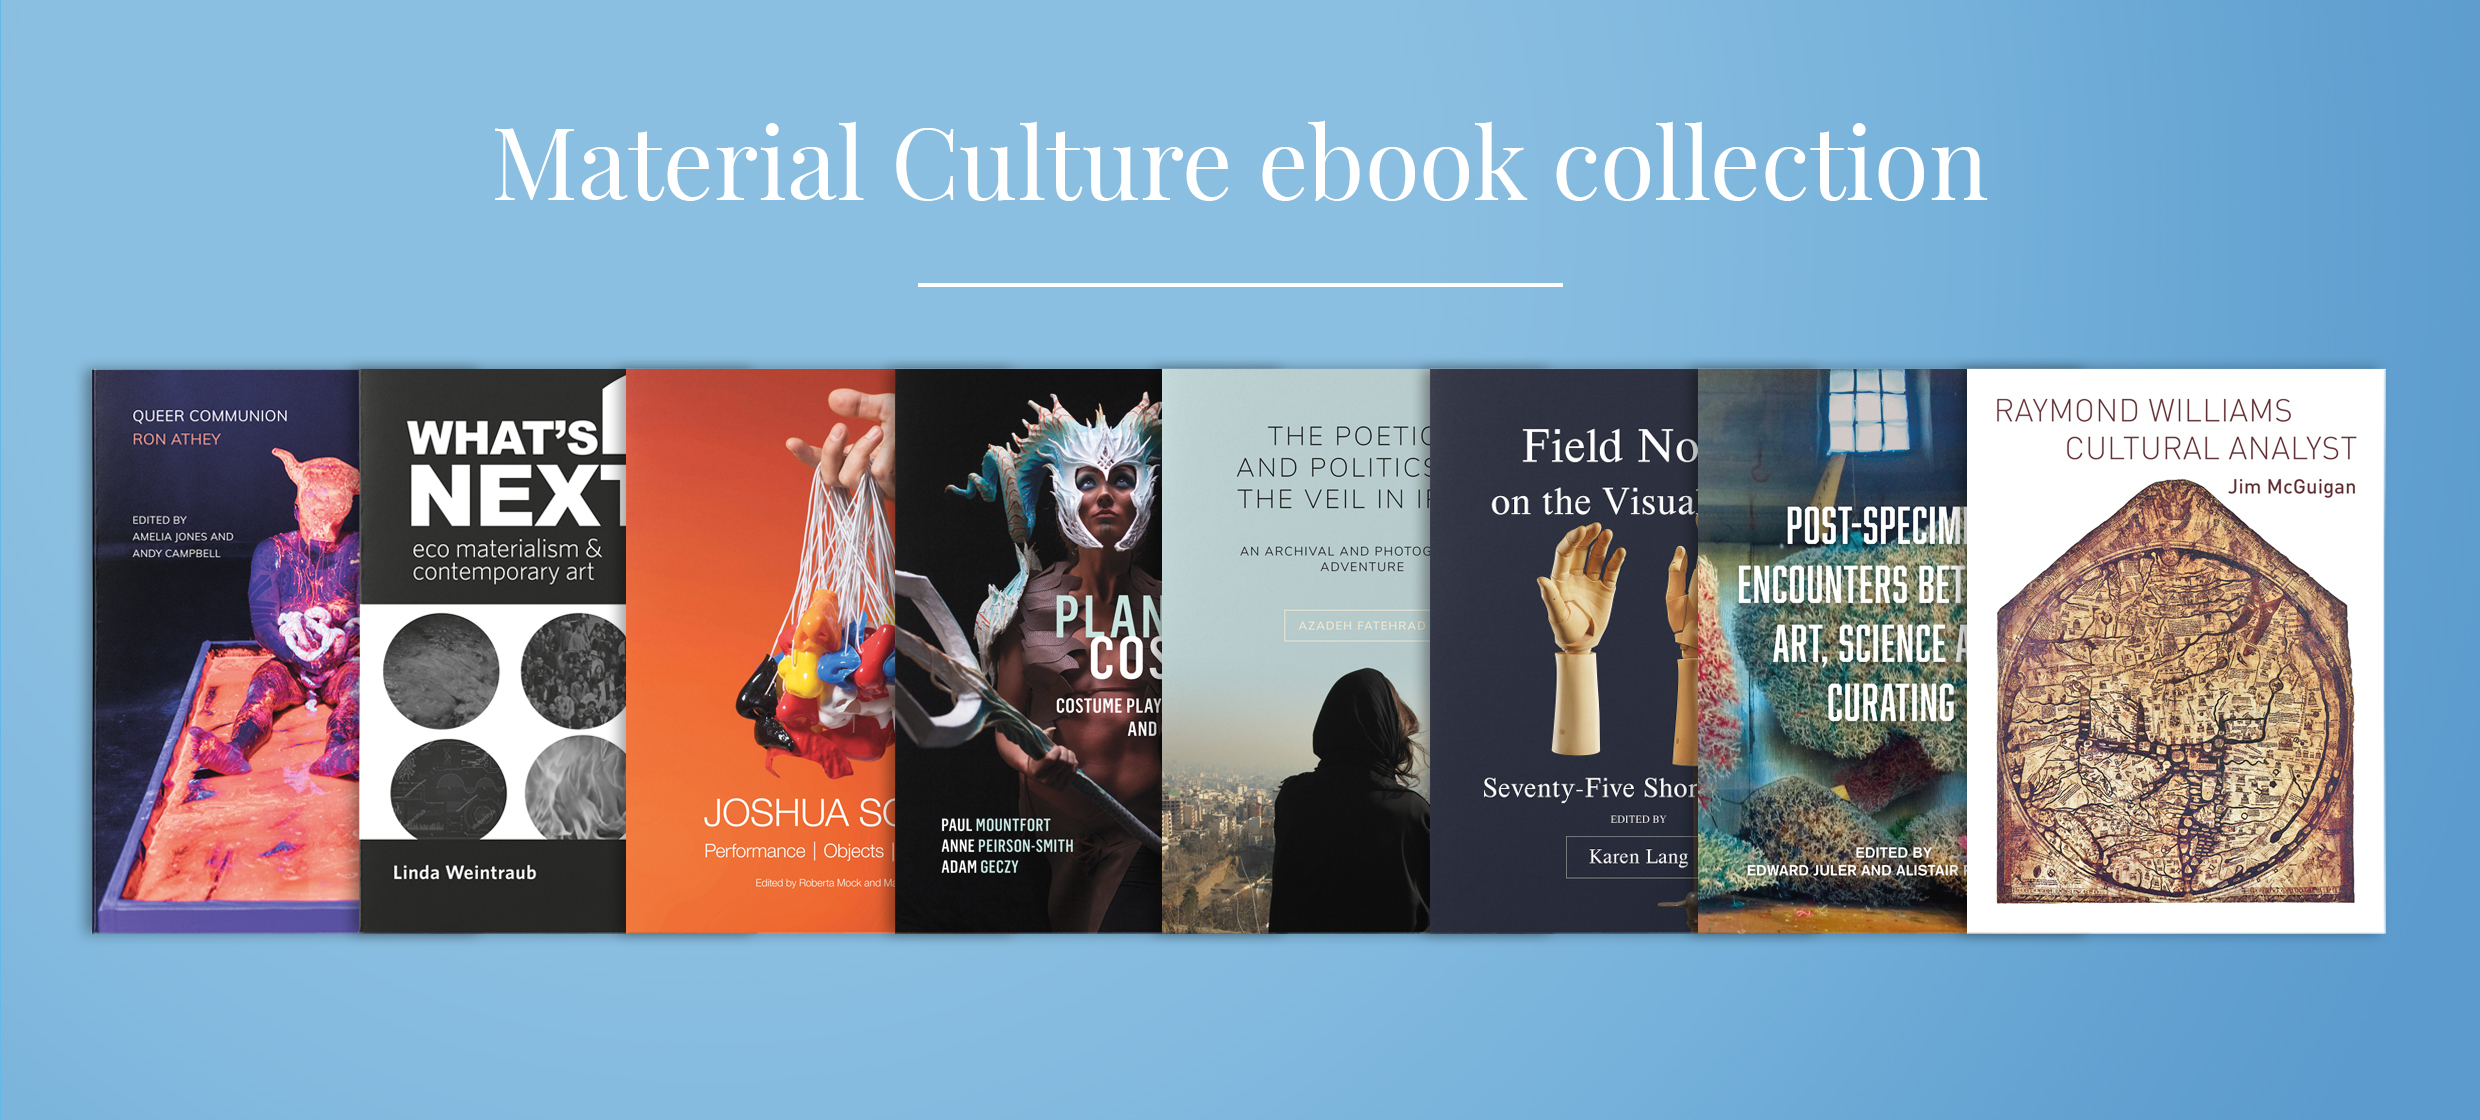 Ebook collection banners - Material Culture